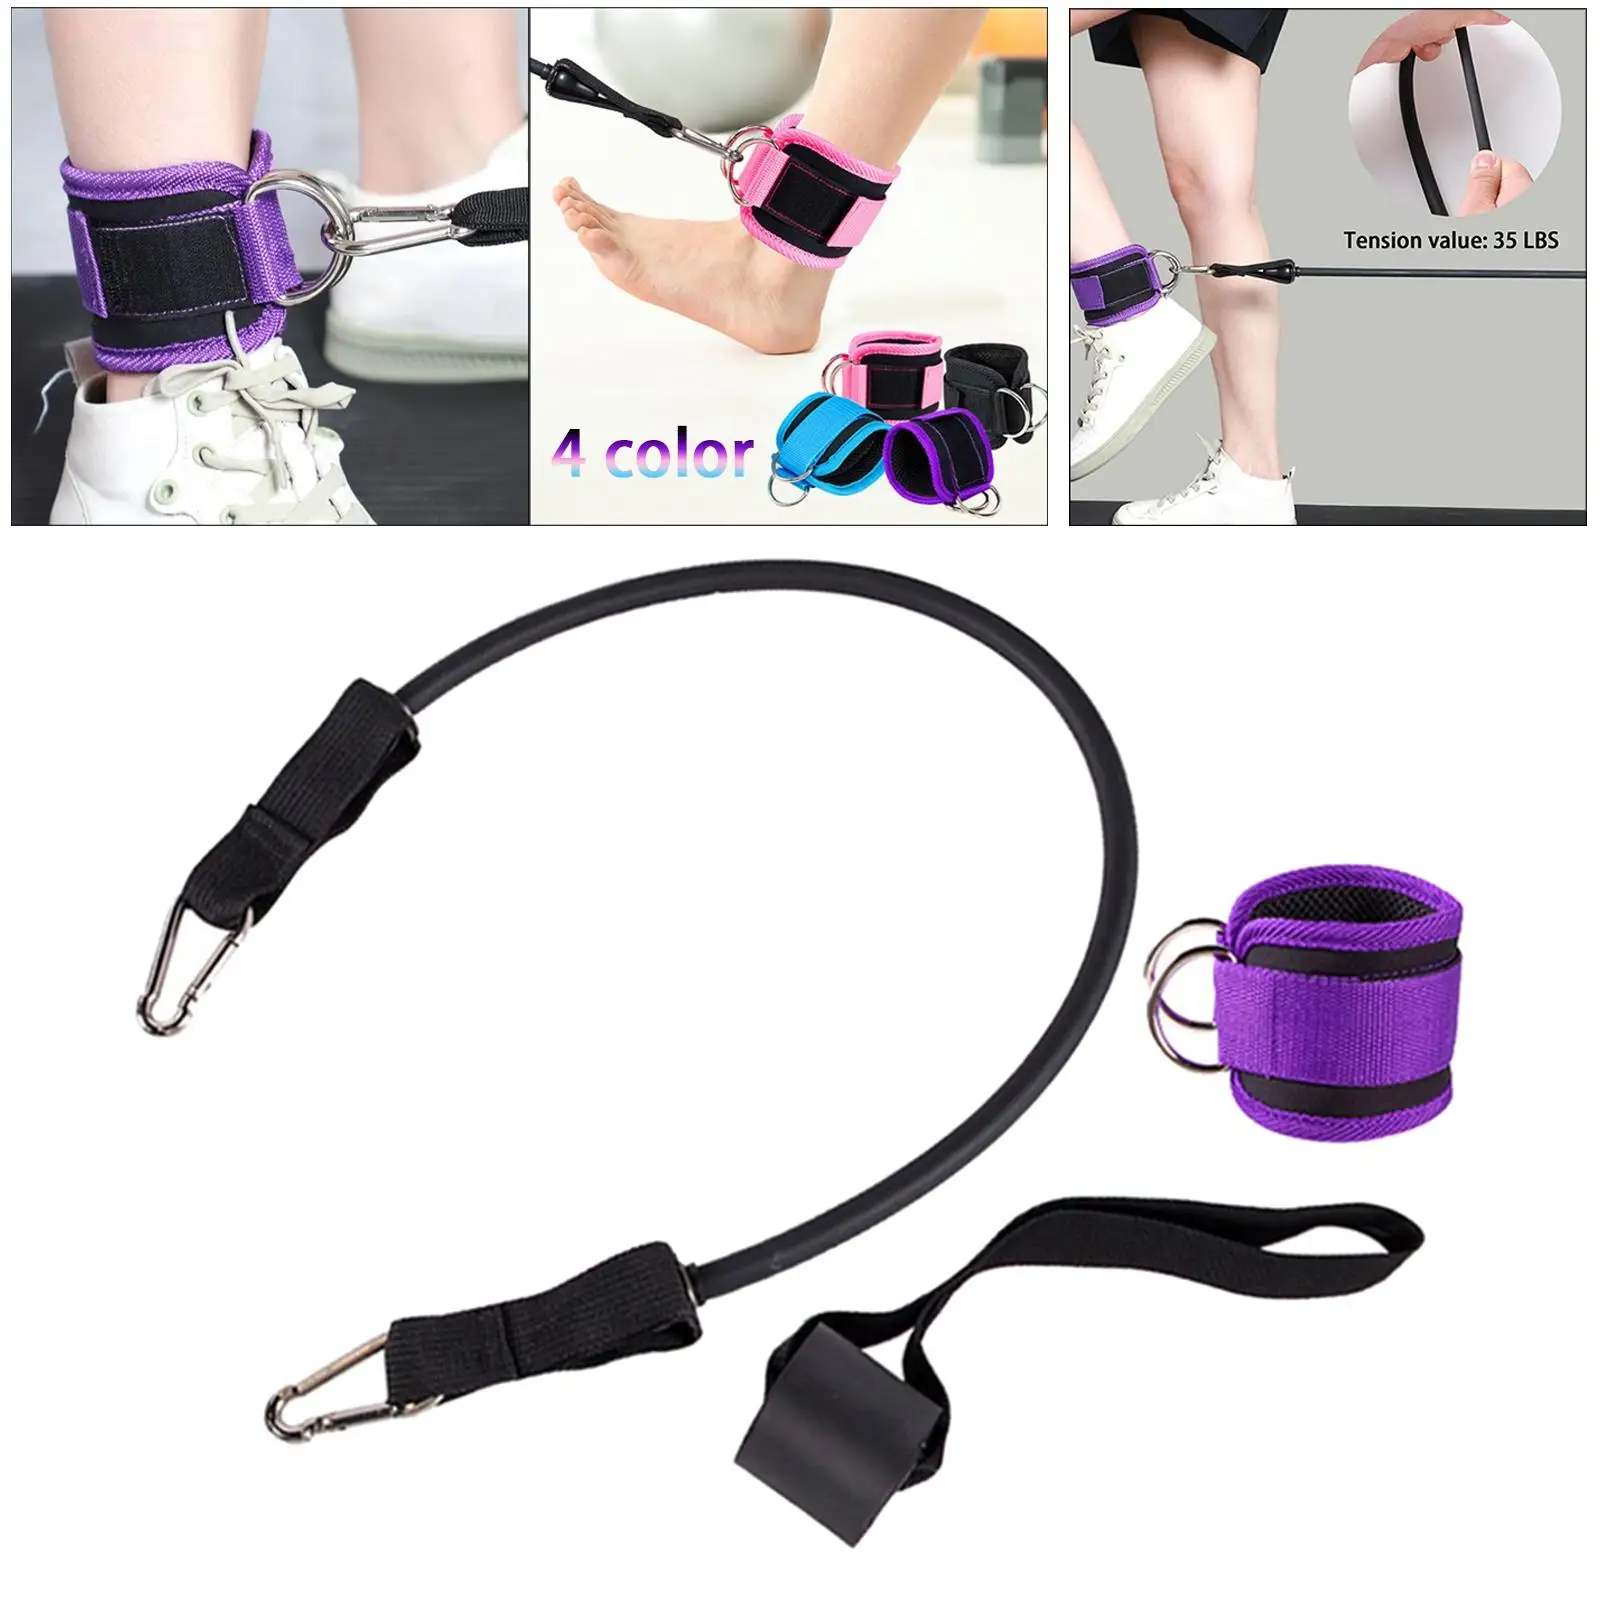 Resistance Band Set Ankle Strap Door Anchor Exercise Equipment Gym